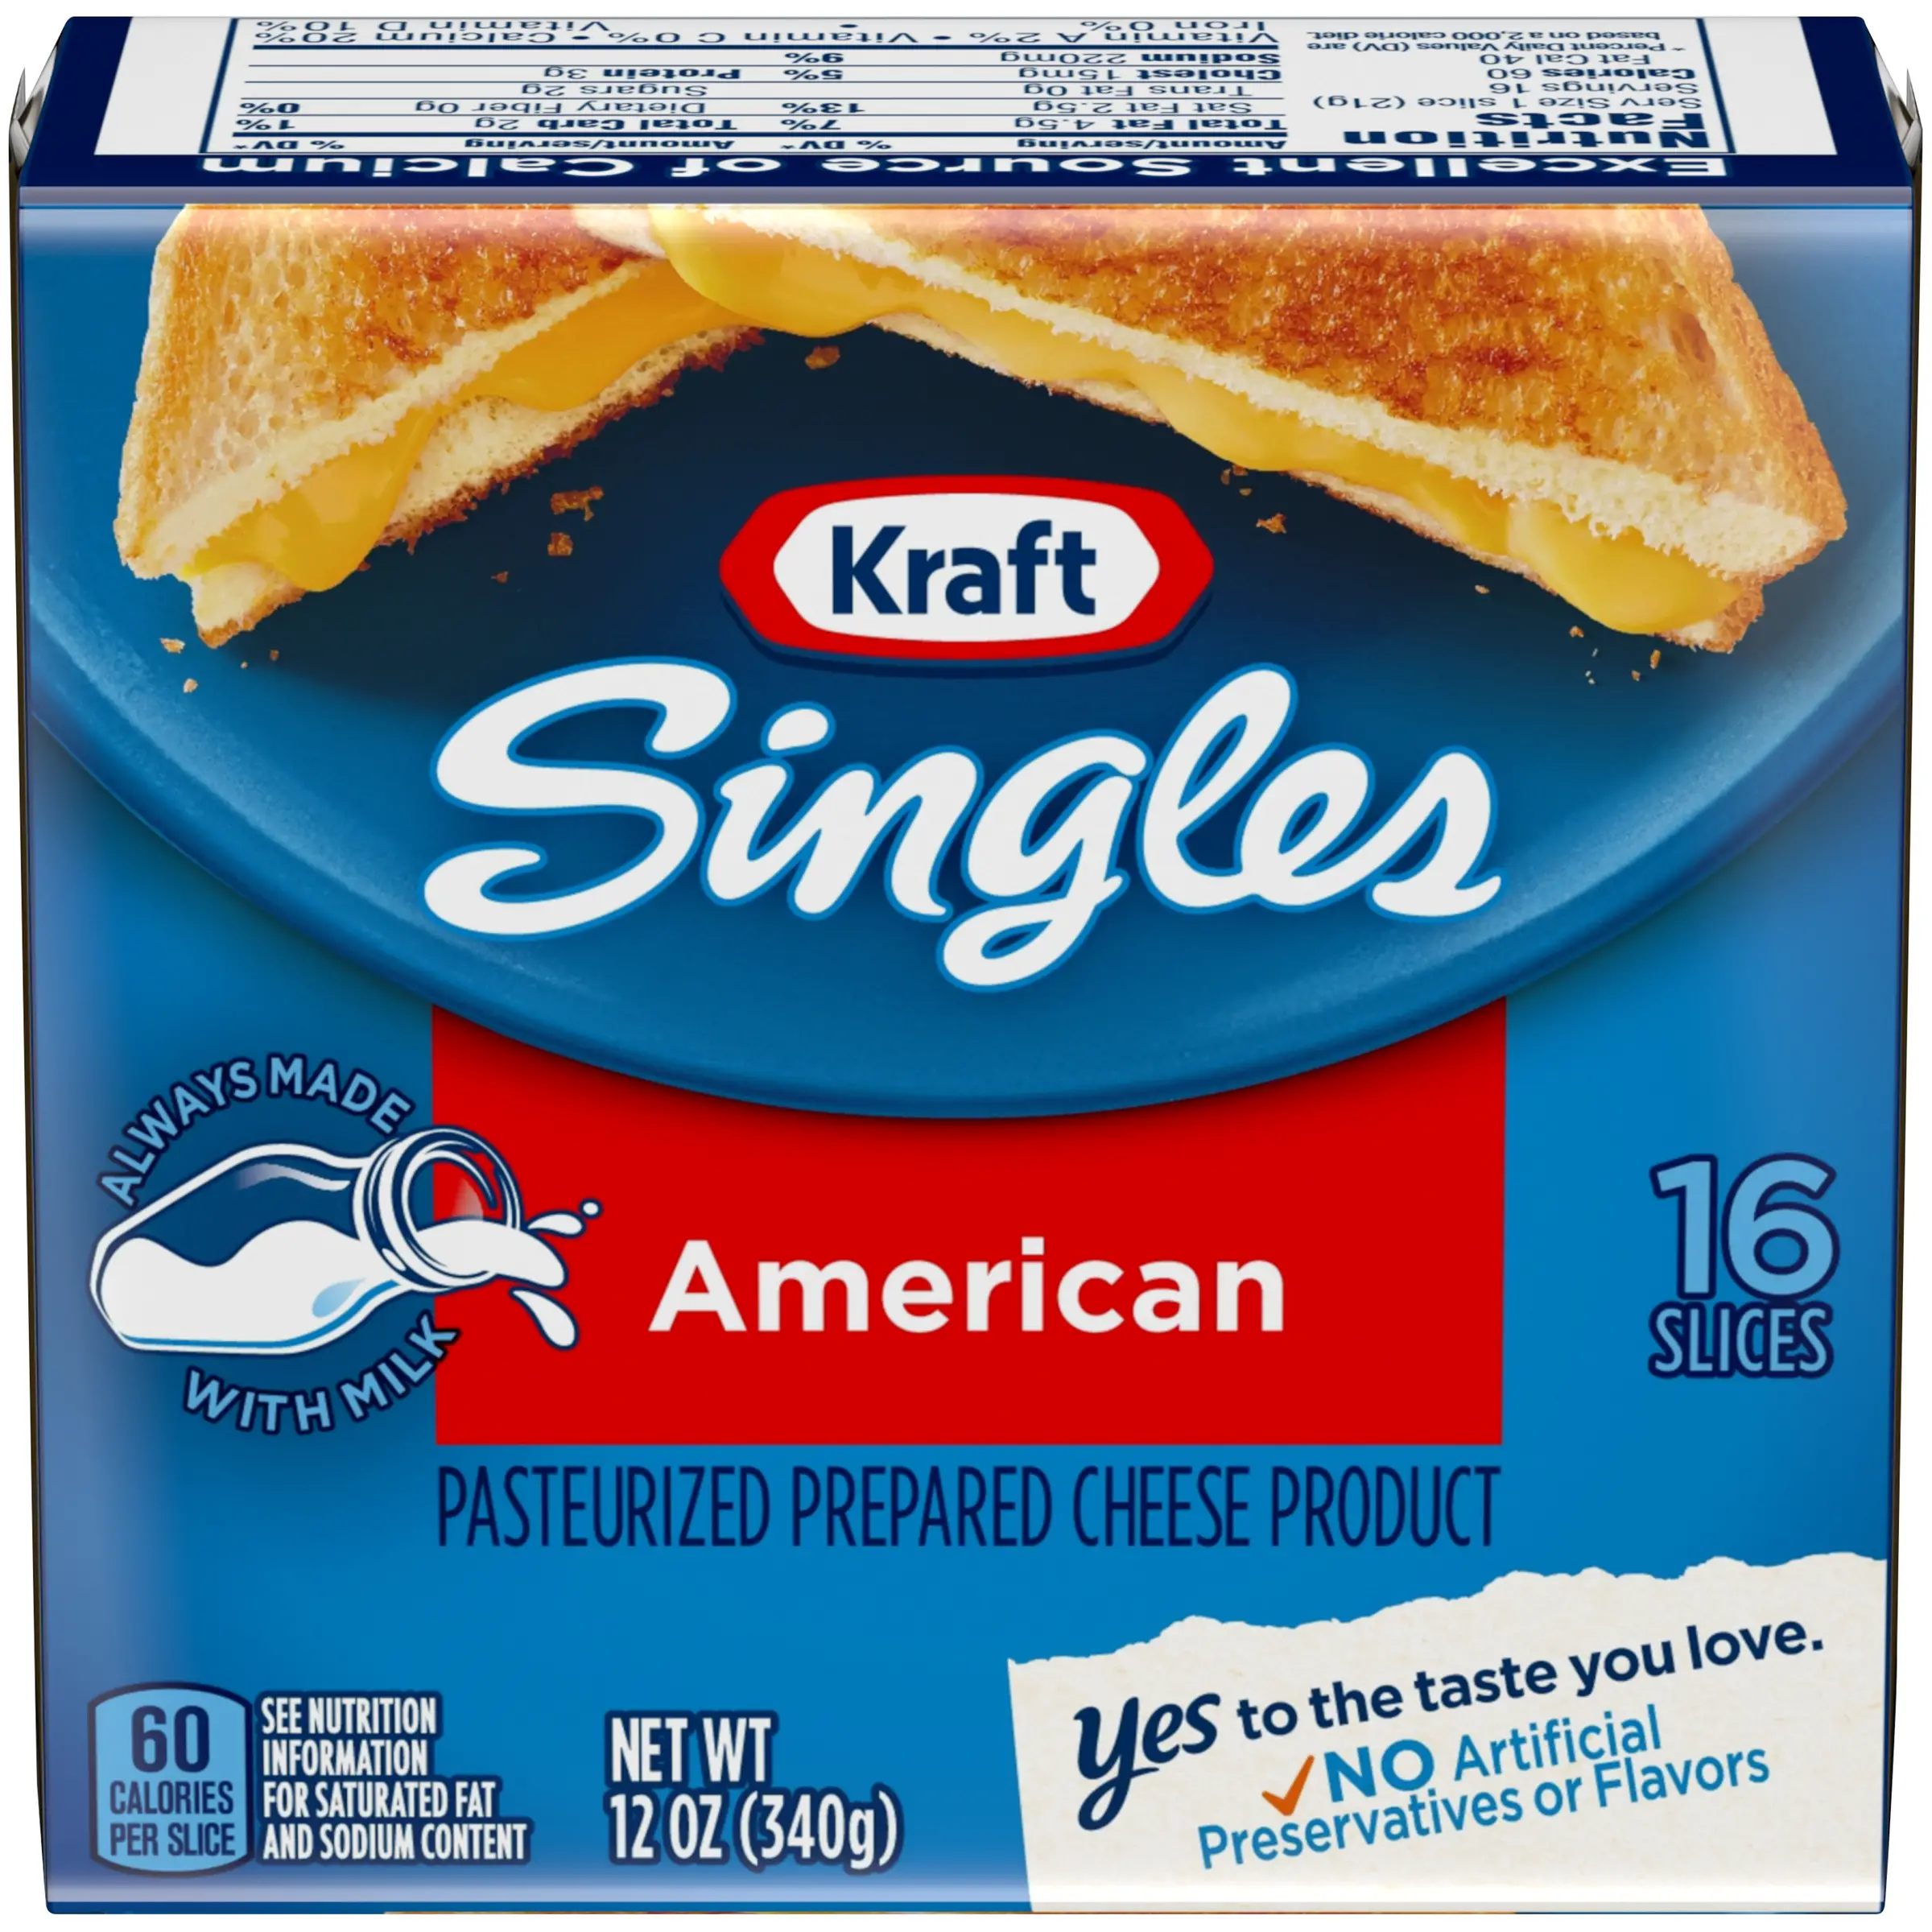 Kraft Singles Cheese Product, Pasteurized Prepared ...